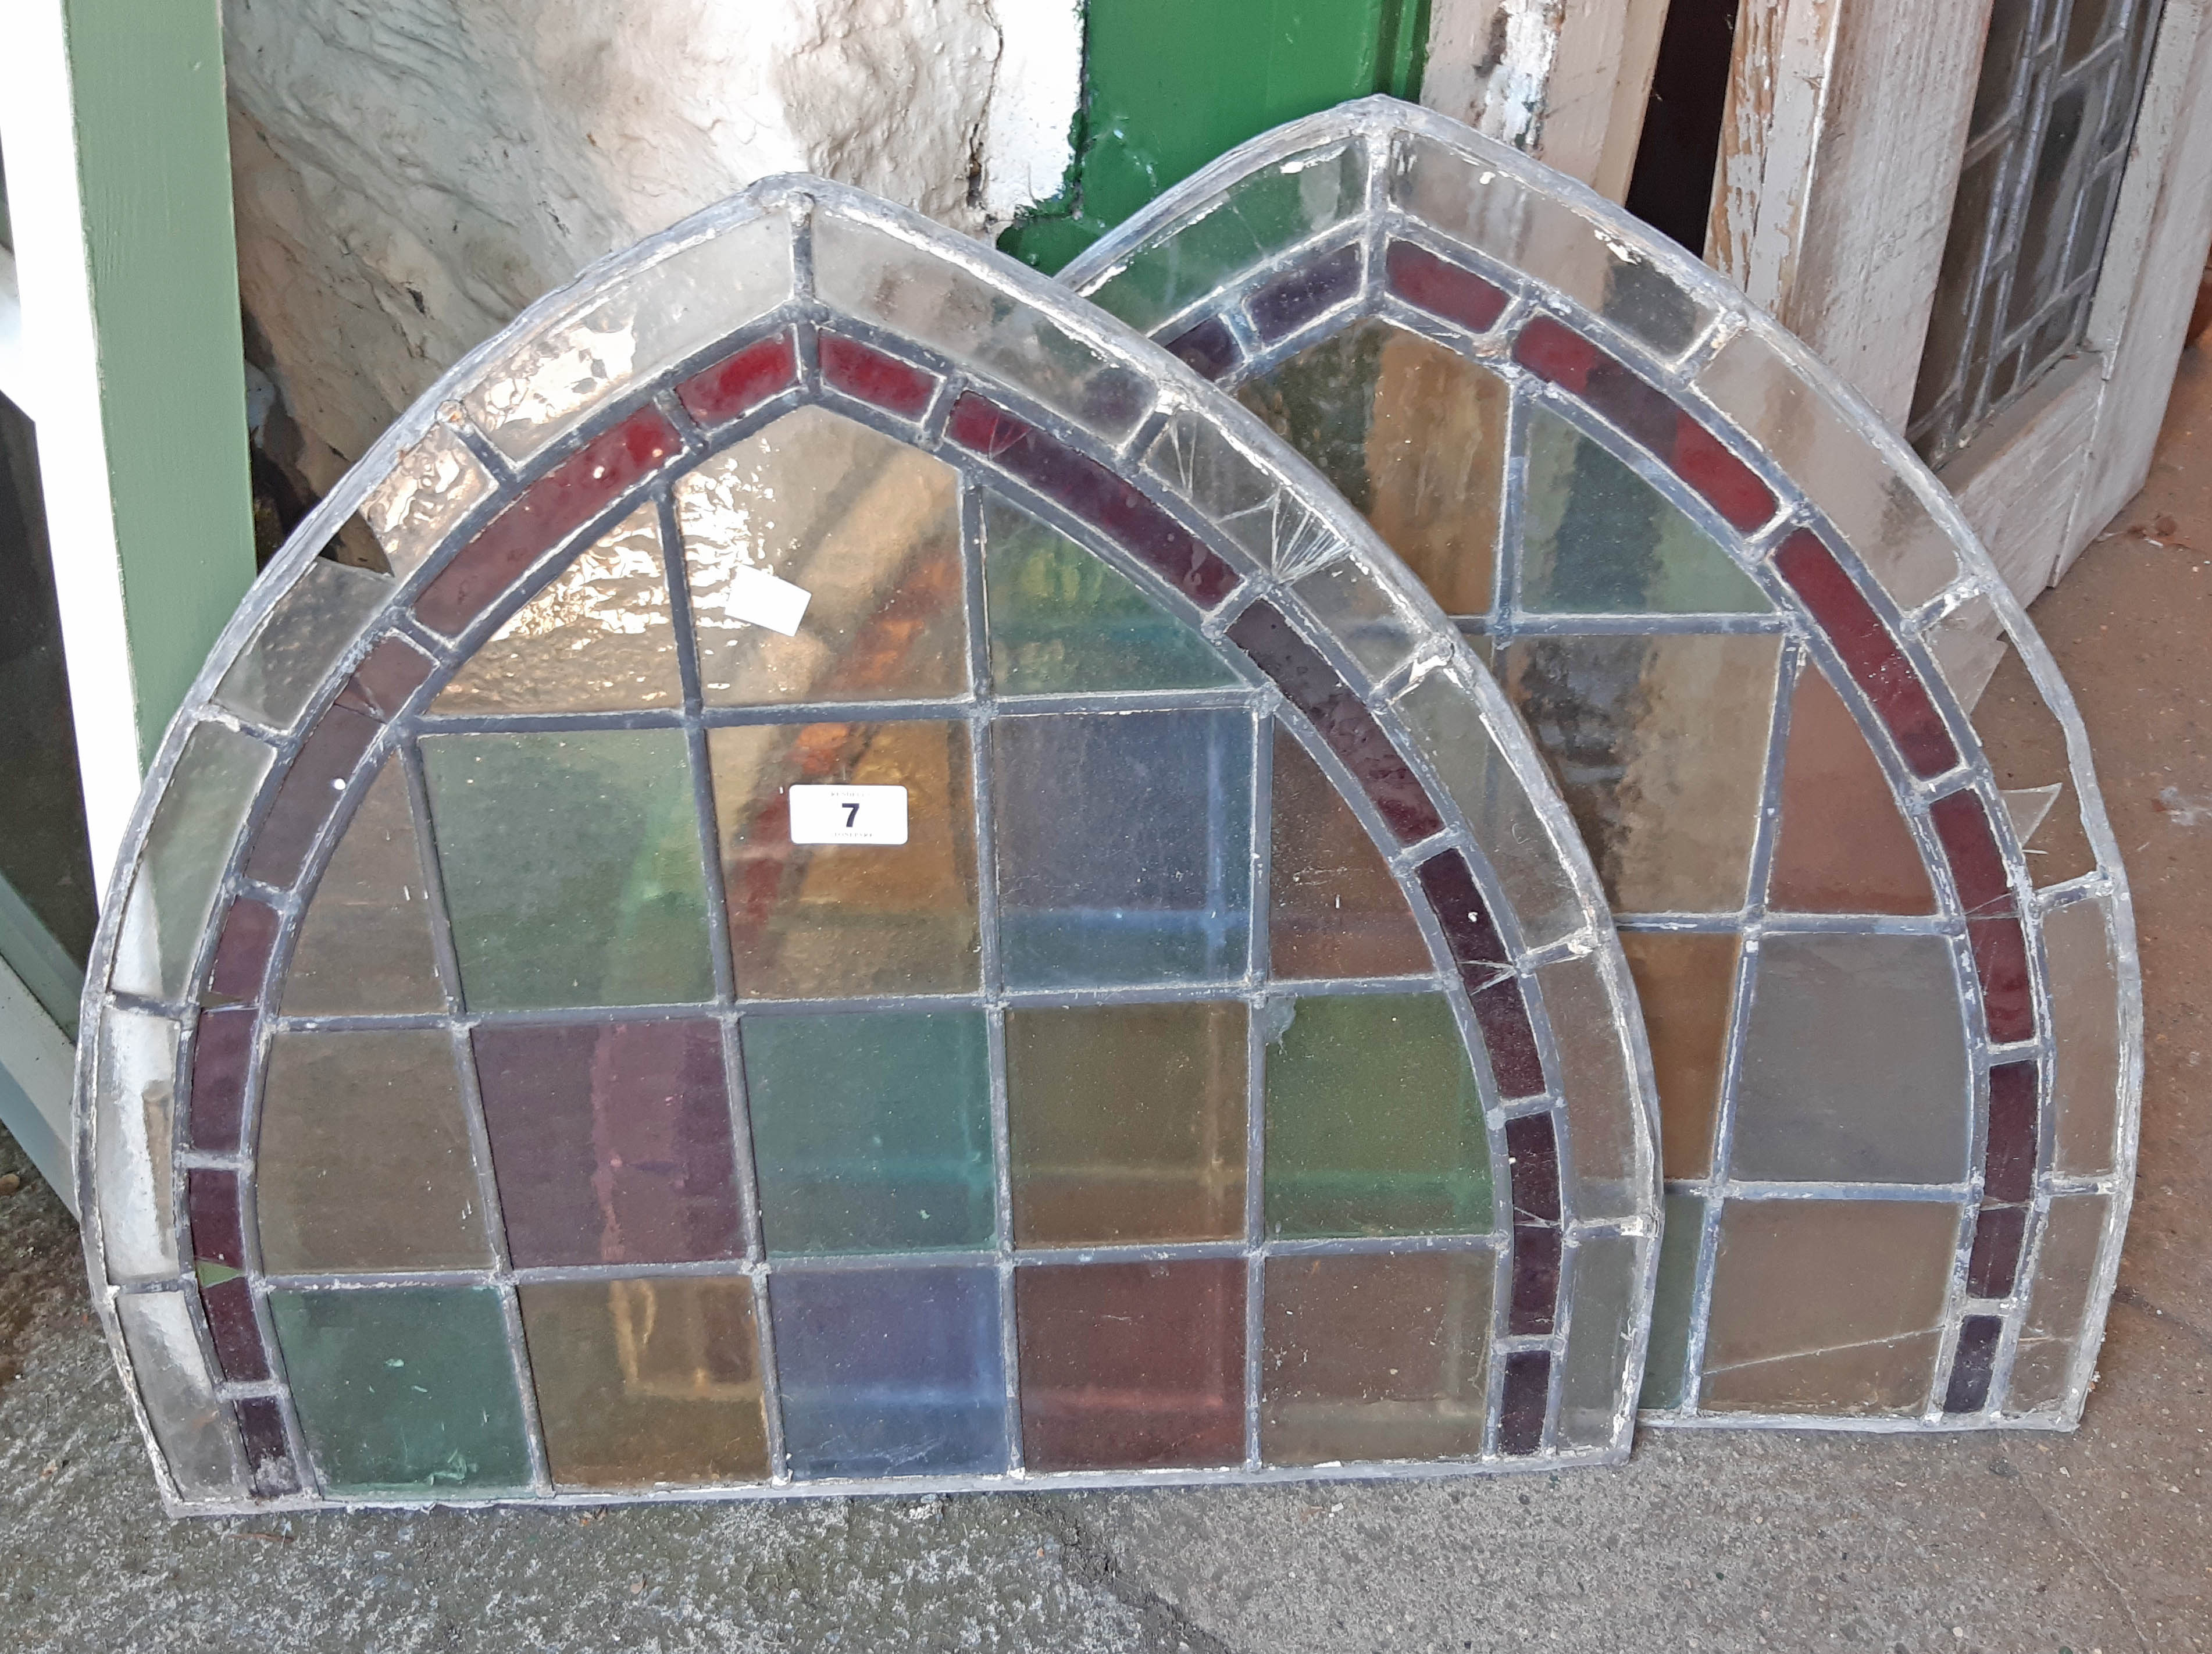 Two stained and leaded glass window panels with arched tops - some damage